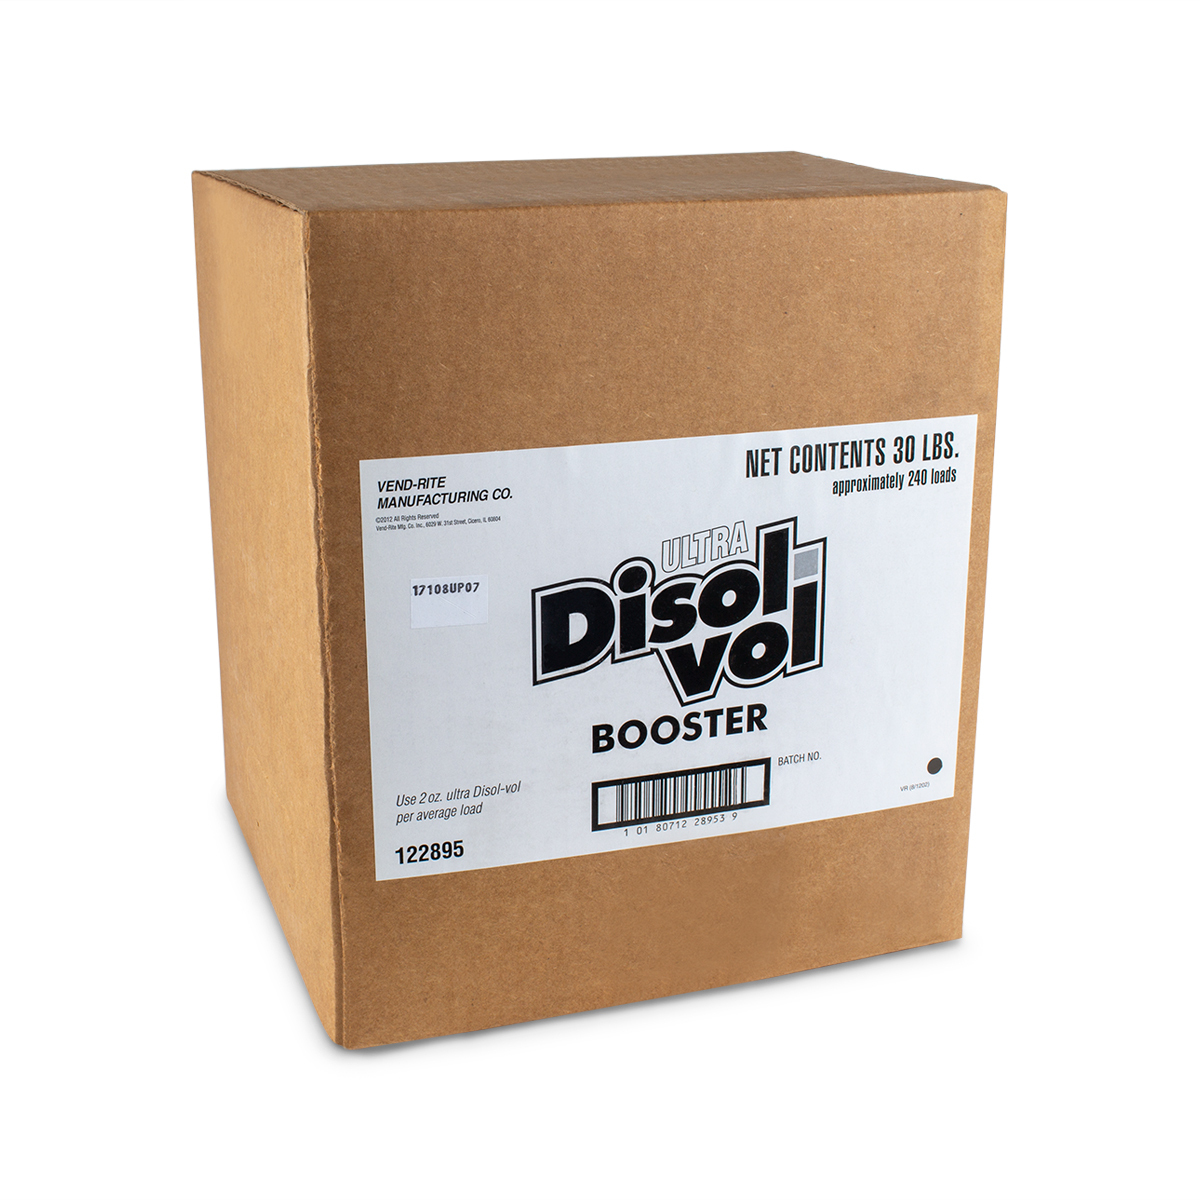 Disol-Vol Laundry Detergent Booster - 30 lbs./Box - Cleaner's Supply